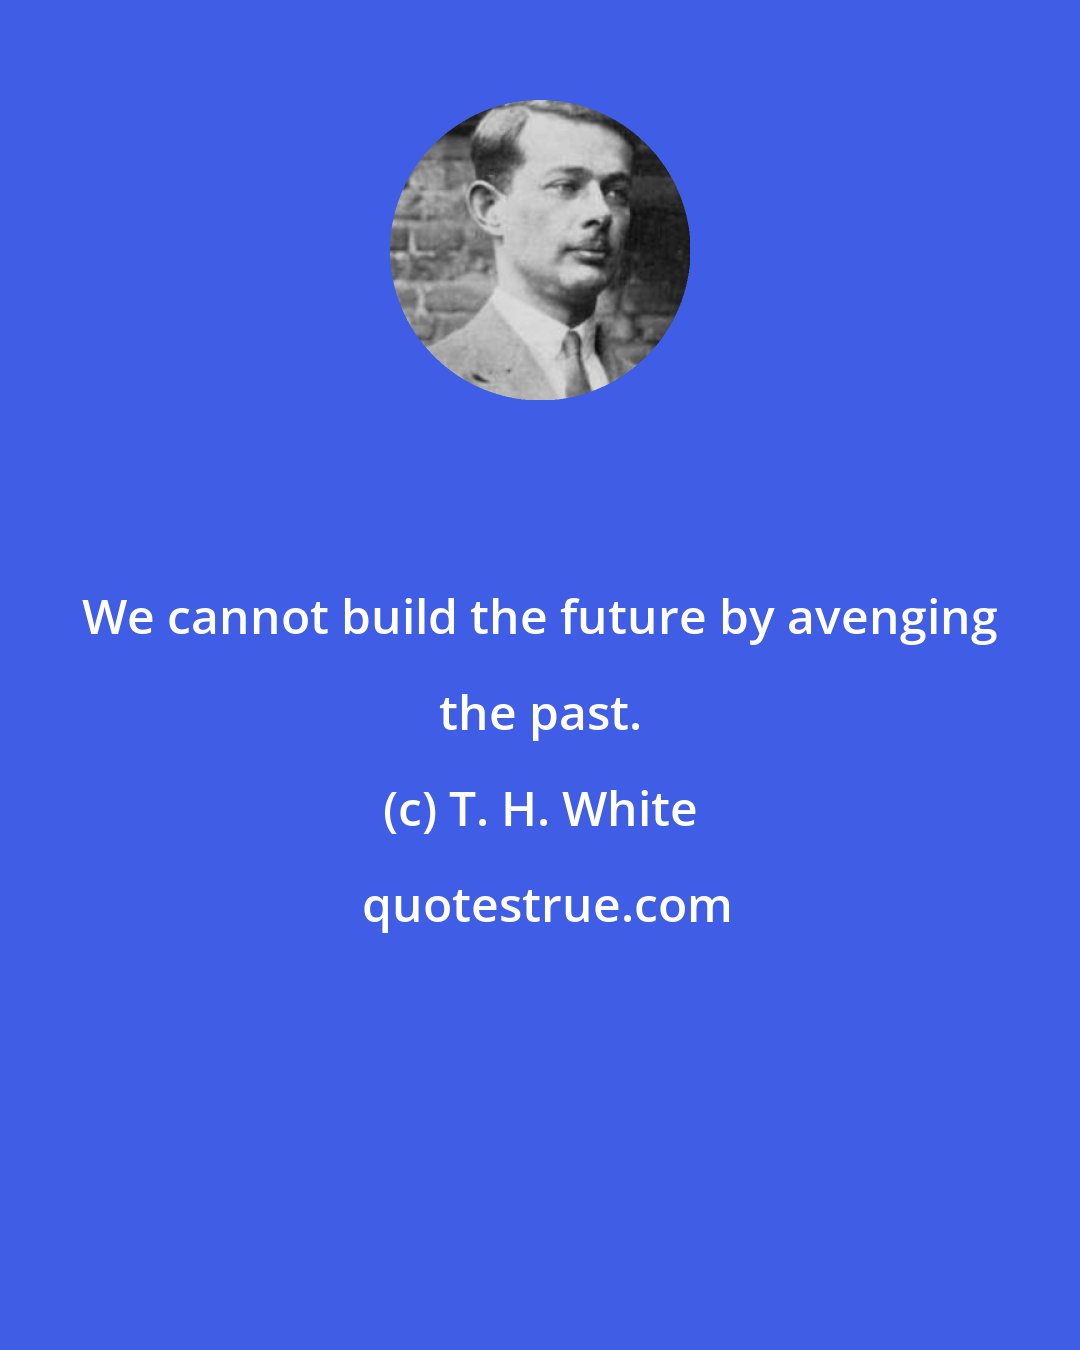 T. H. White: We cannot build the future by avenging the past.